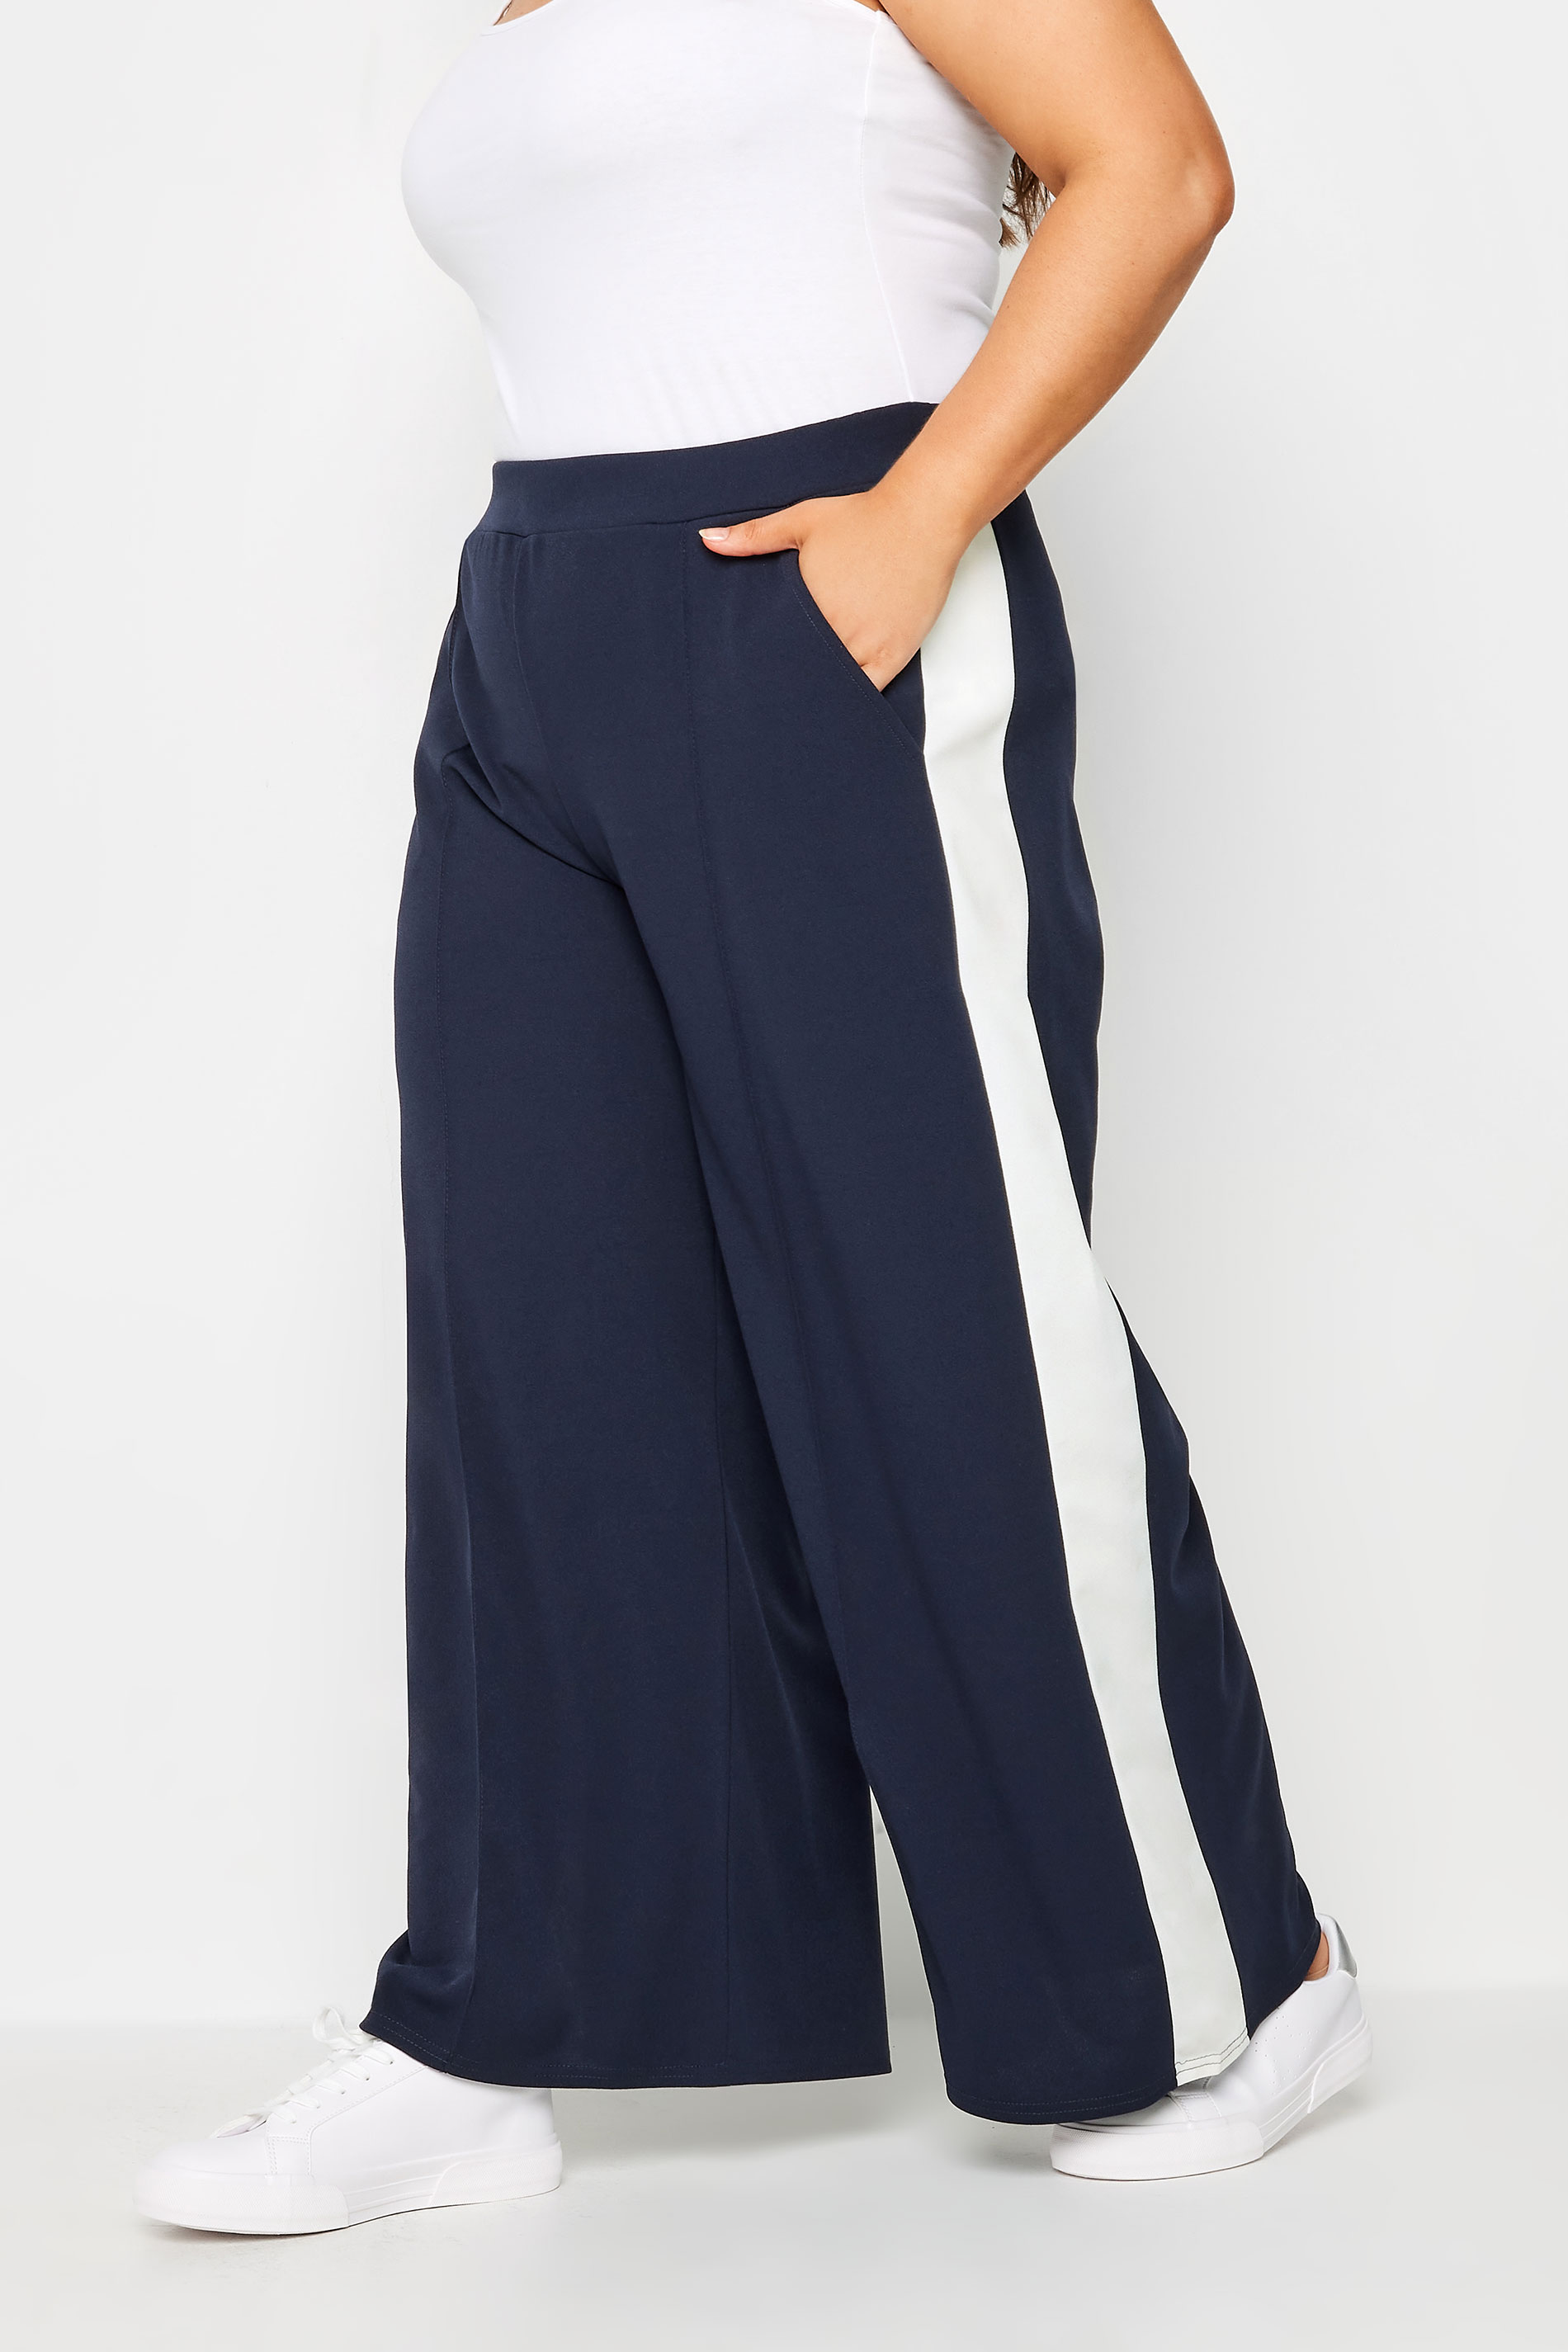 YOURS Plus Size Navy Blue & White Scuba Side Stripe Trousers | Yours Clothing 1